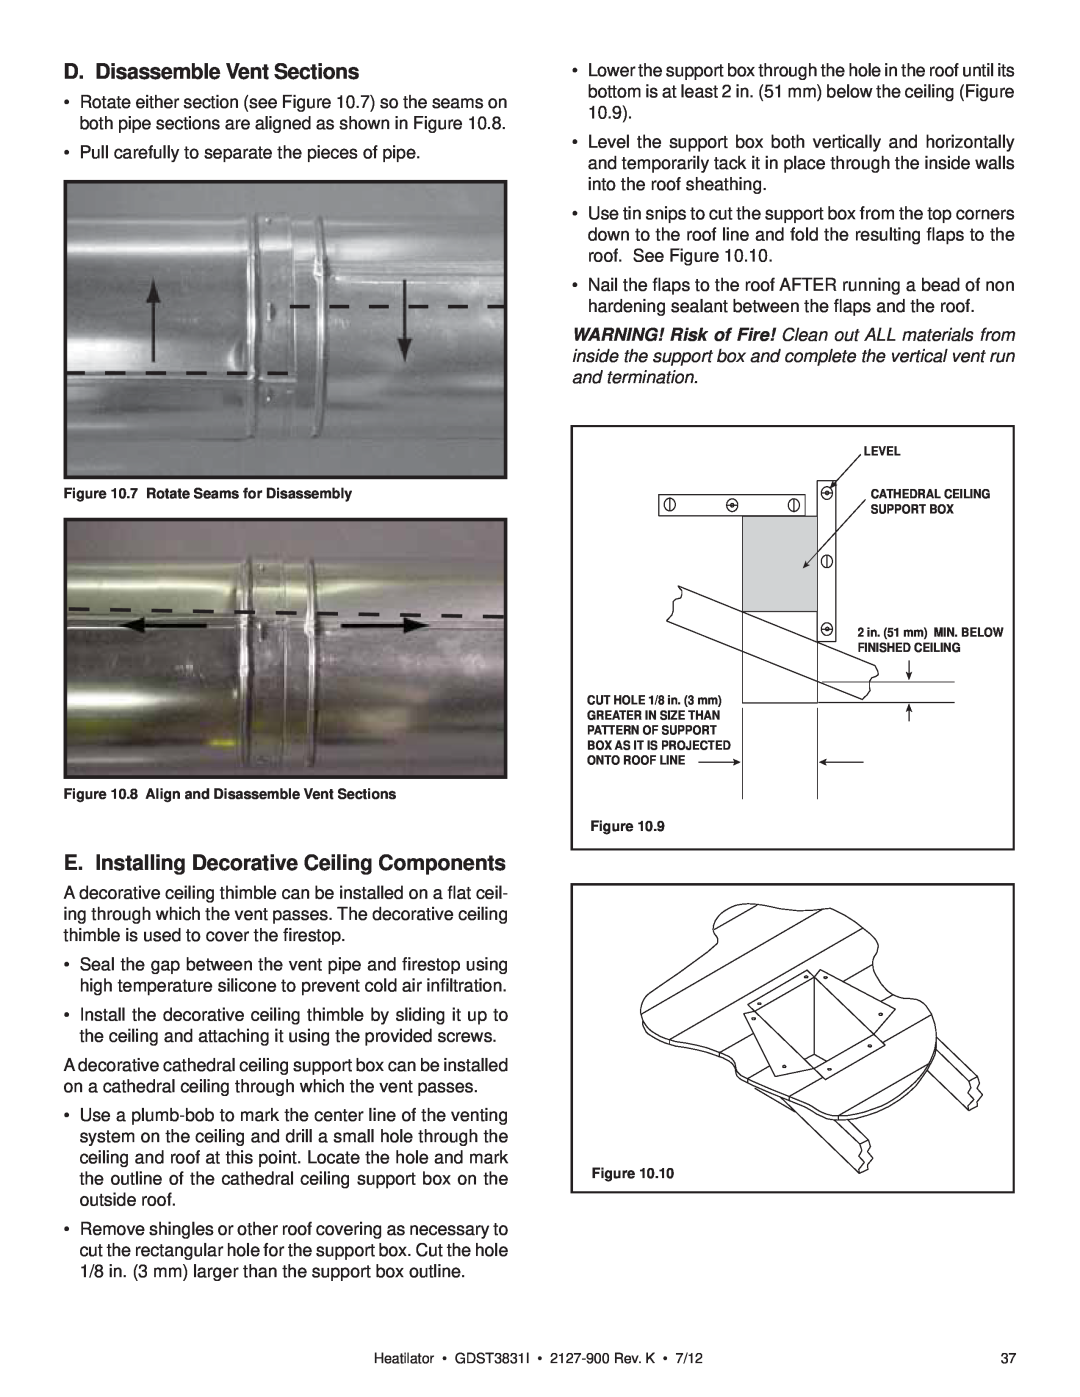 Heatiator GDST3831I owner manual D. Disassemble Vent Sections, E. Installing Decorative Ceiling Components 